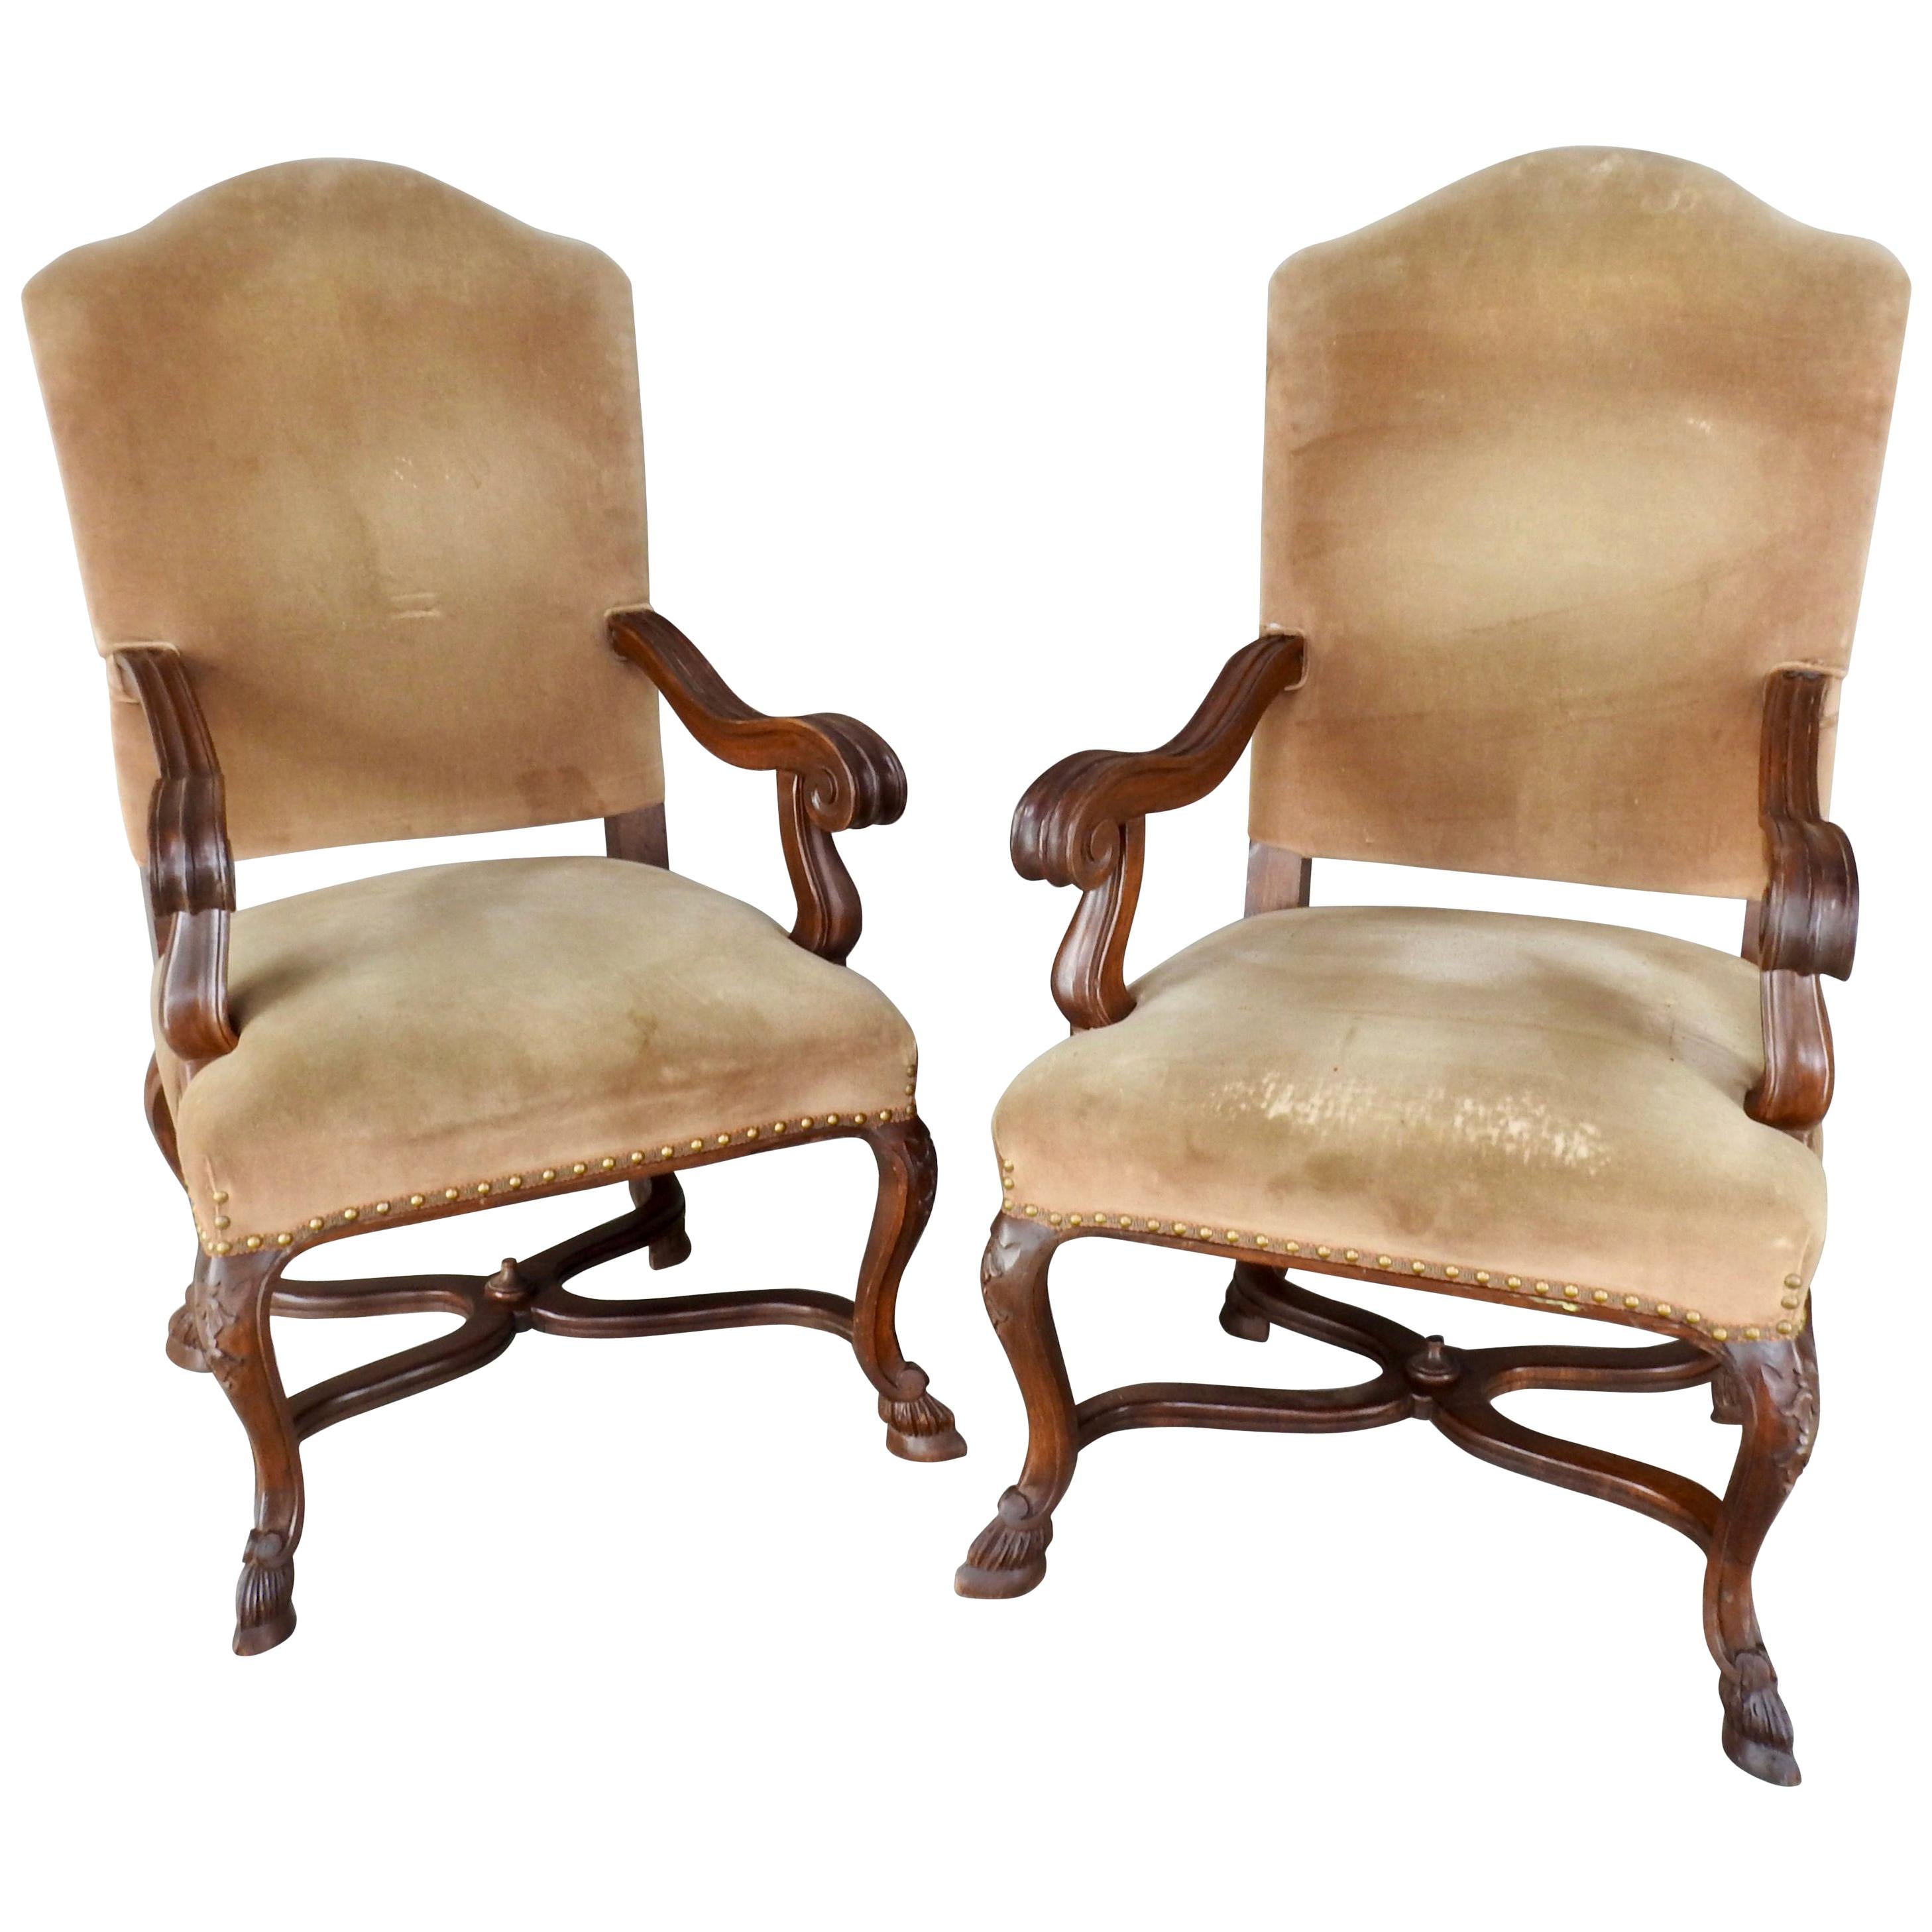 American Goat Feet Chairs, Pair For Sale